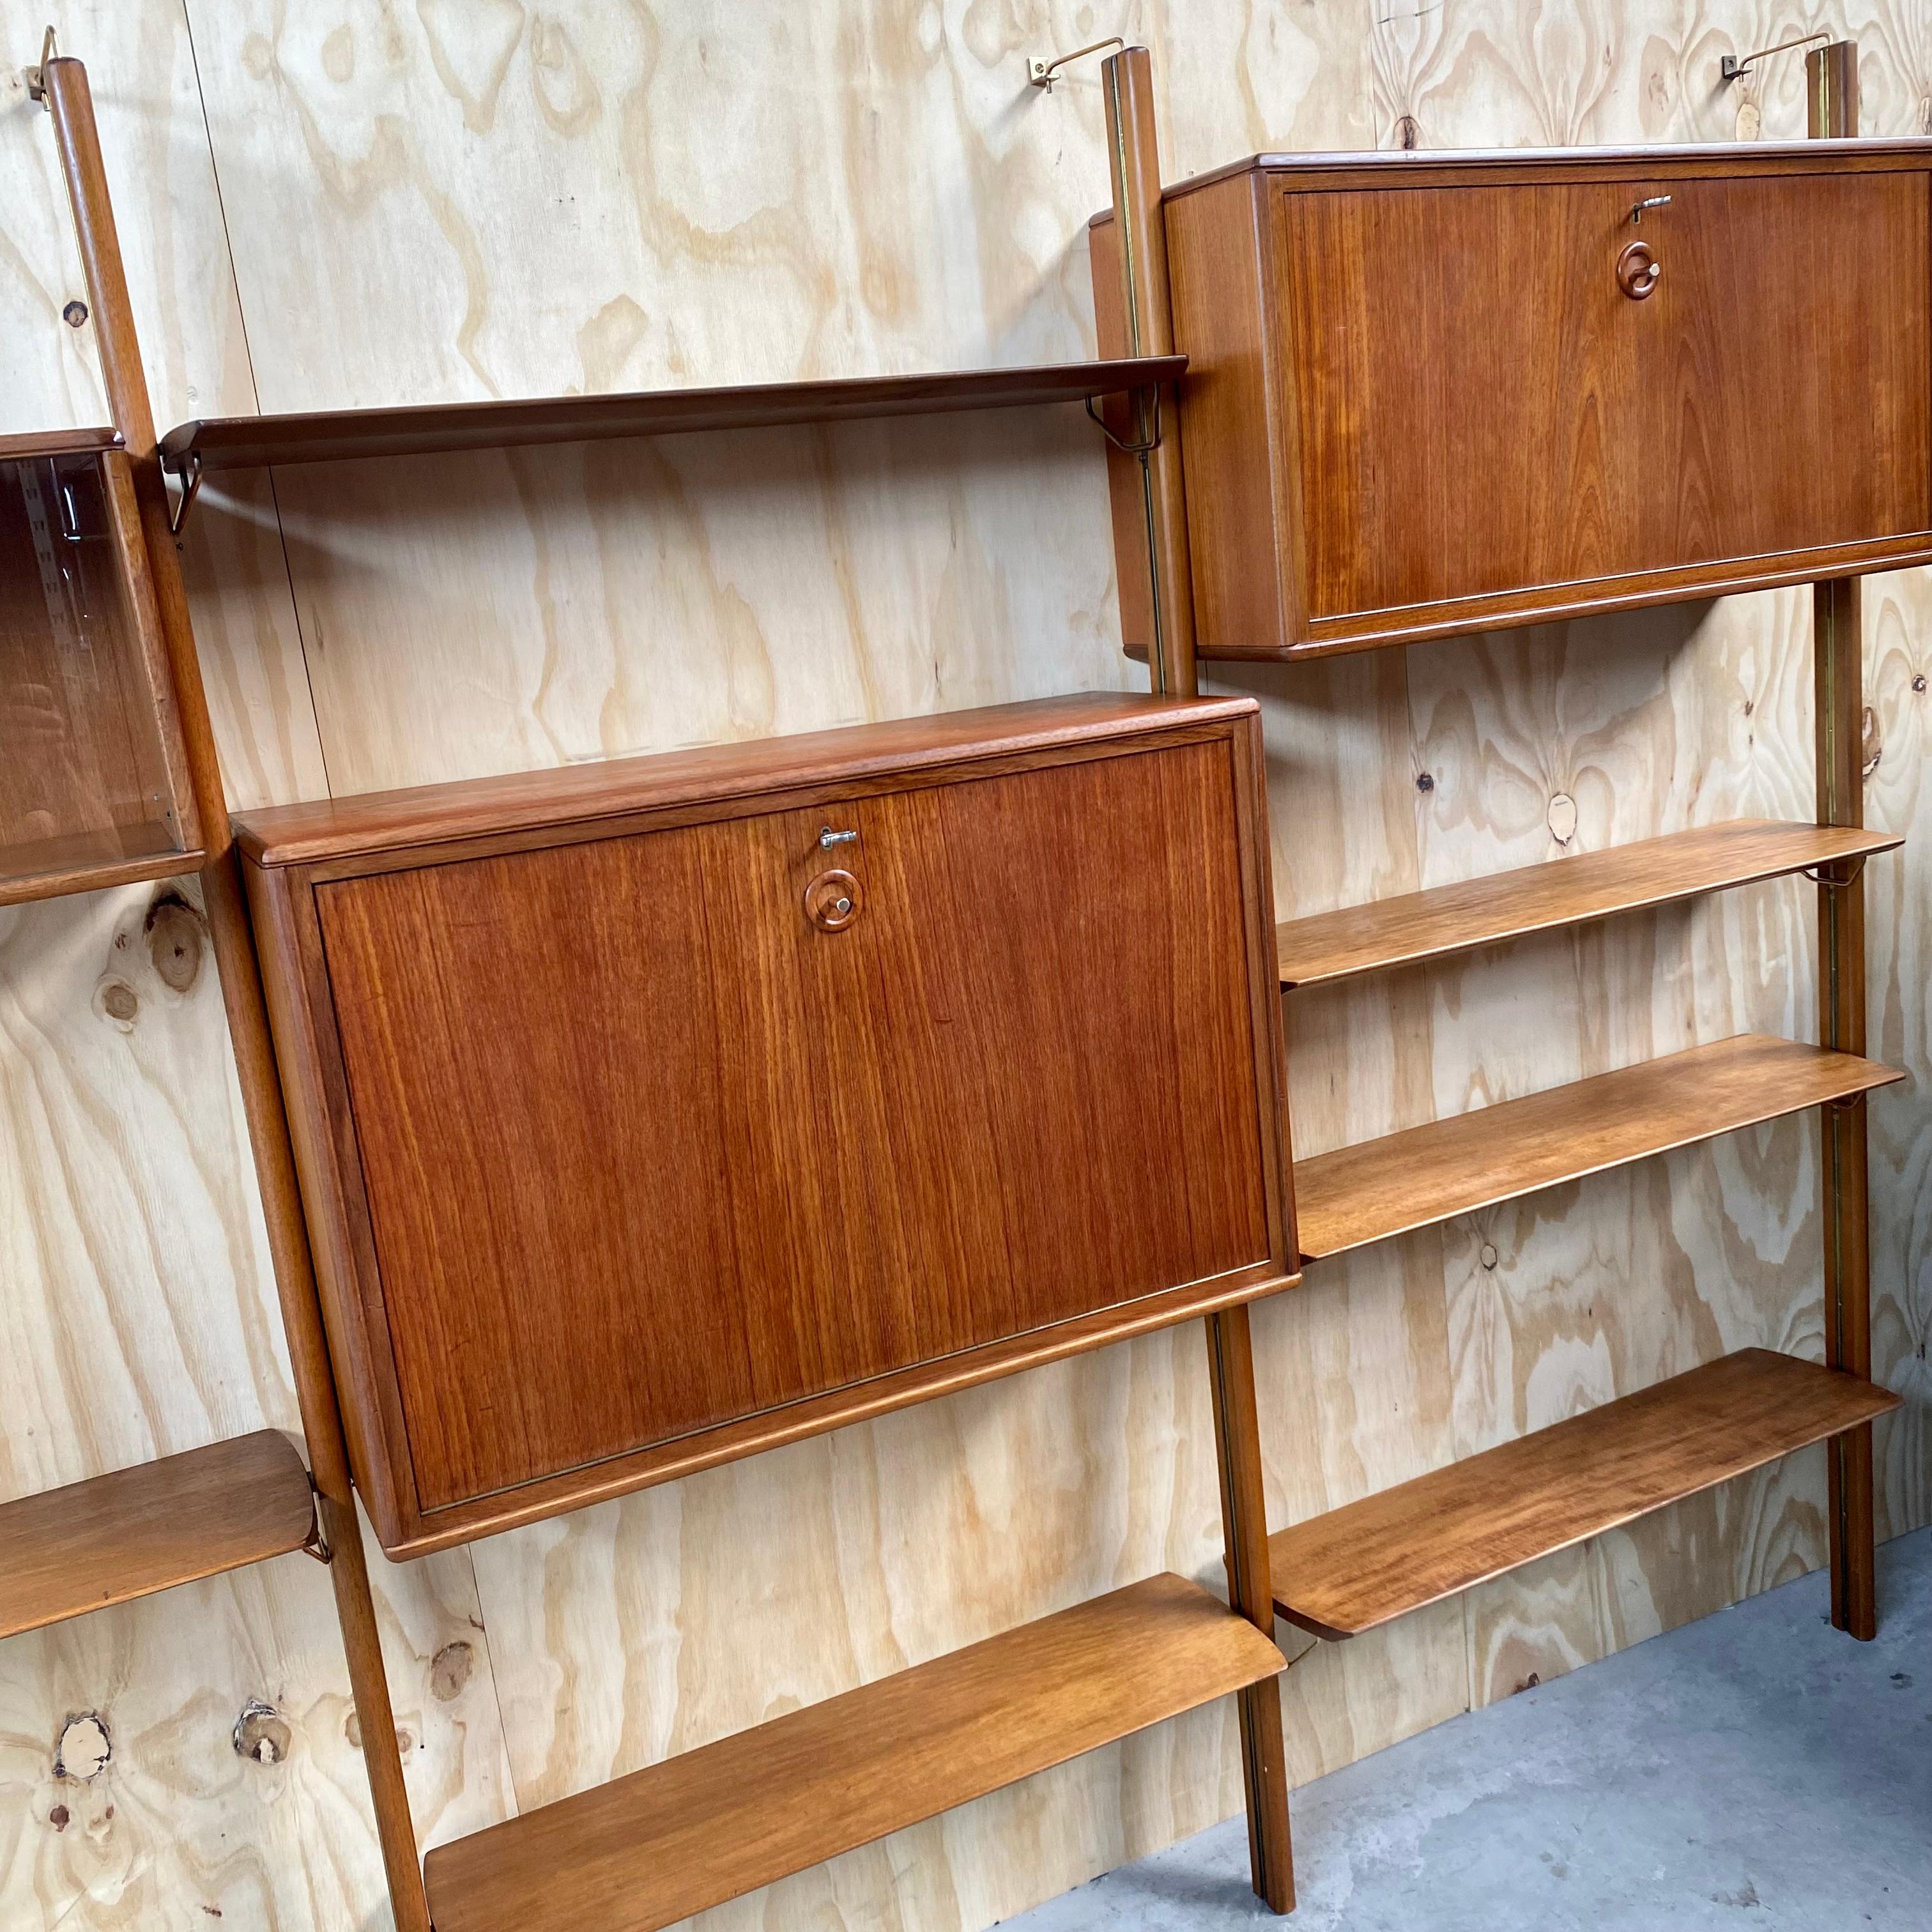 Mid-20th Century Large Teak Wall Unit Bookcase by William Watting for Fristho Netherlands 1950